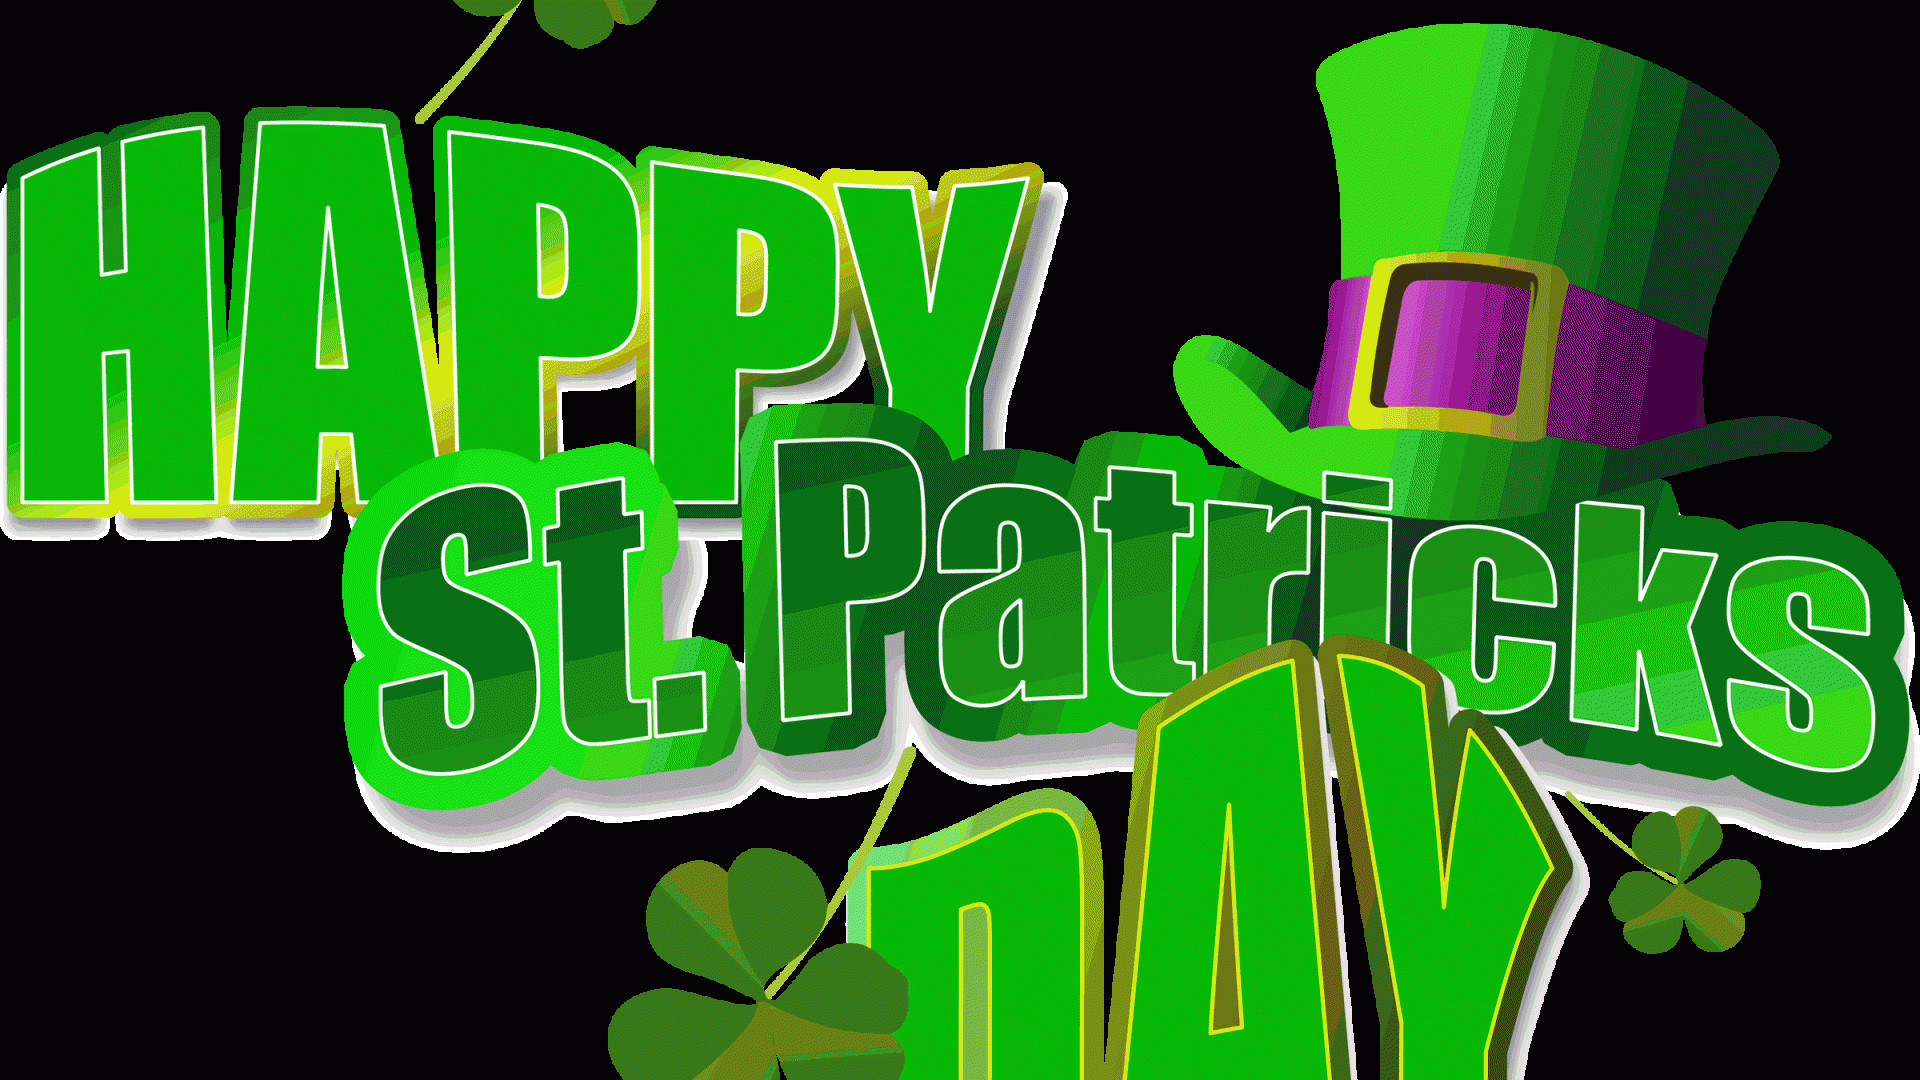 St Patricks Day Backgrounds 52 images